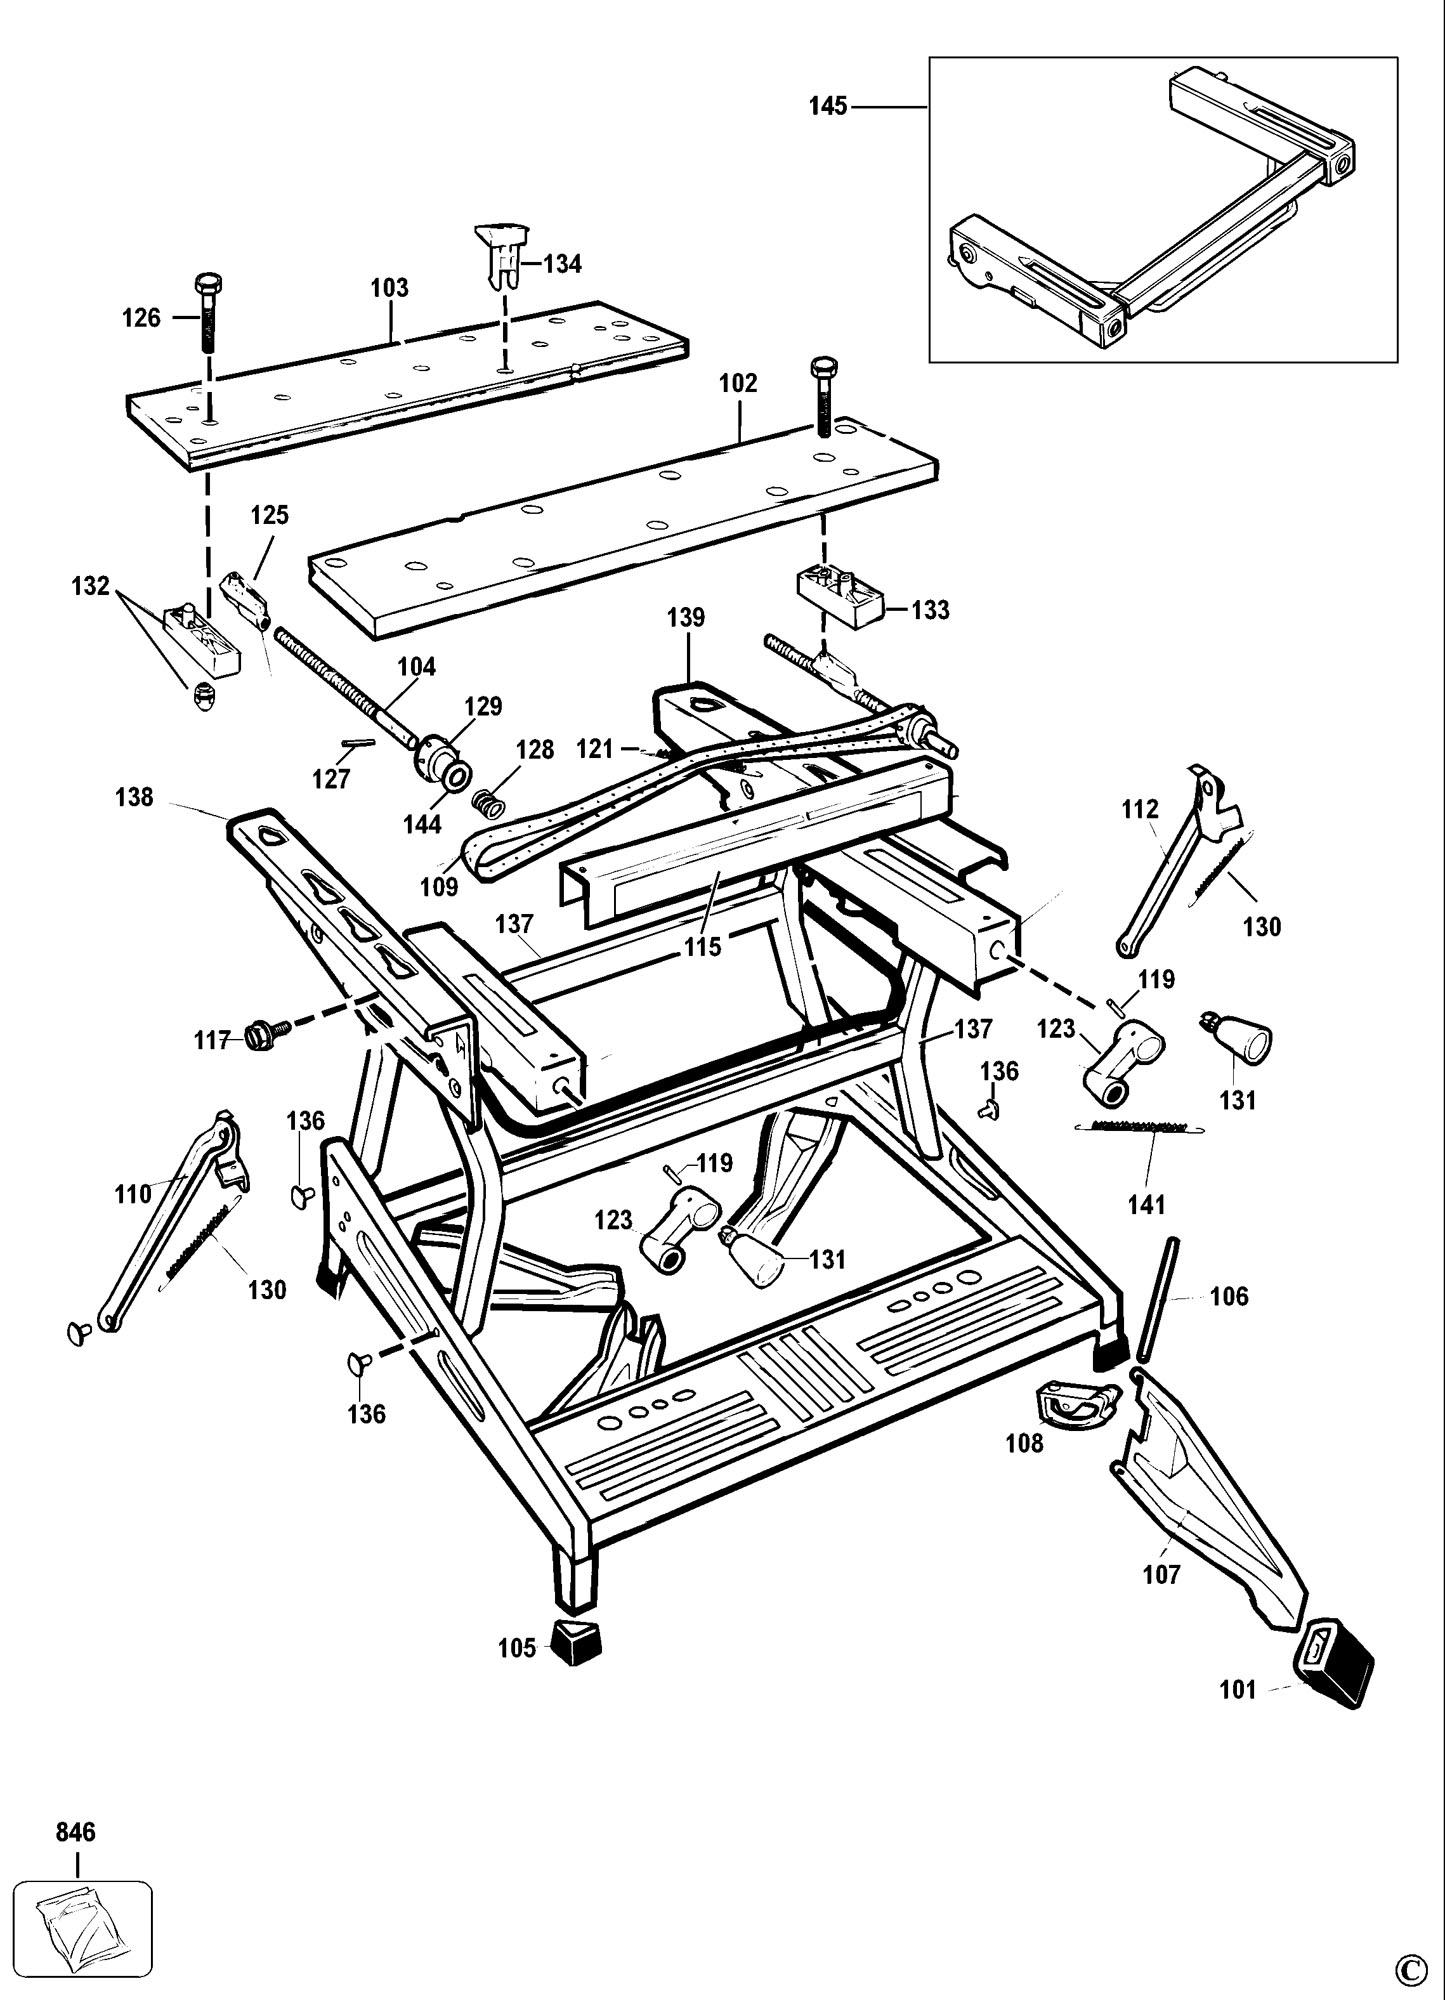 black and decker workmate instructions